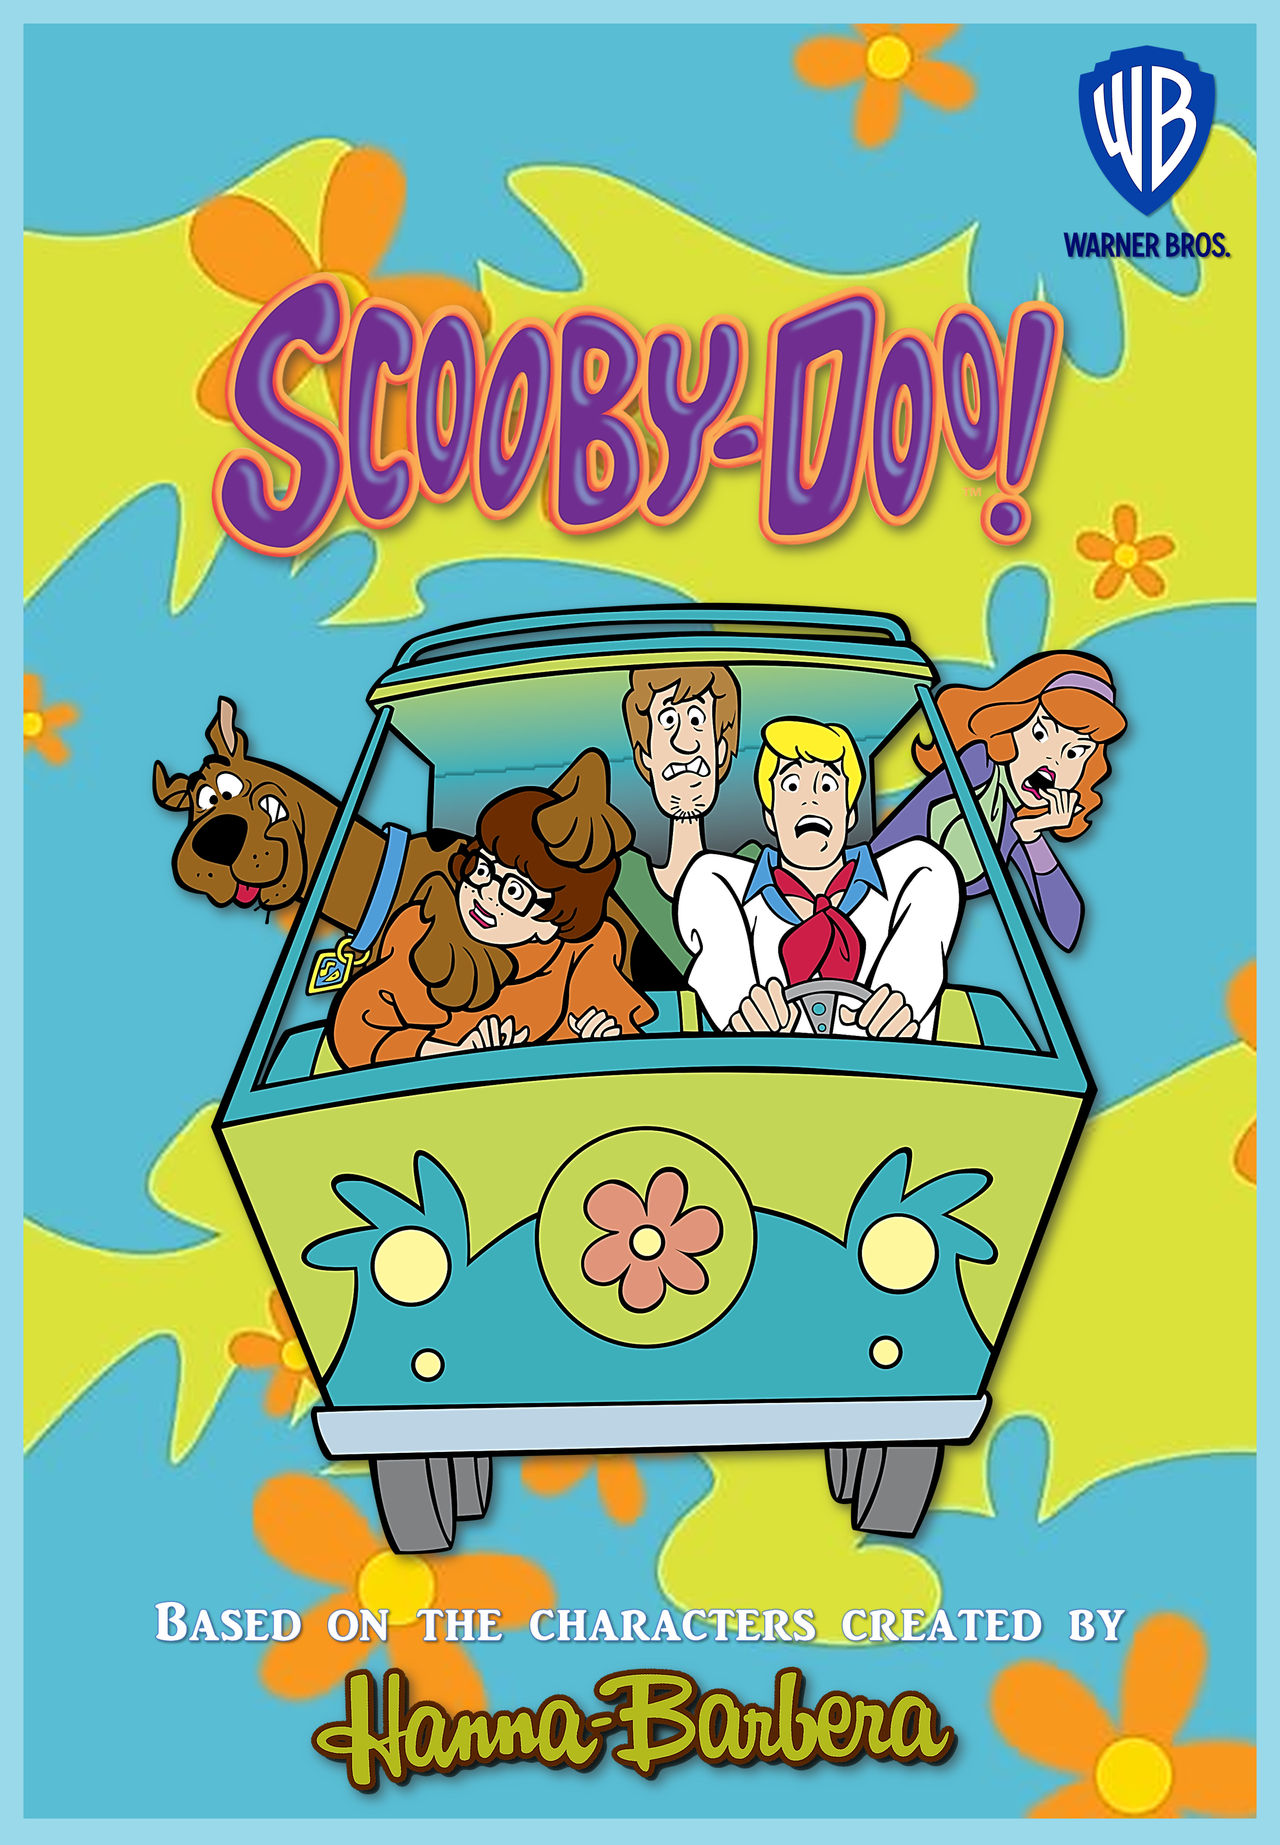 Scooby-Doo on Hanna-Barbera by gikesmanners1995 on DeviantArt